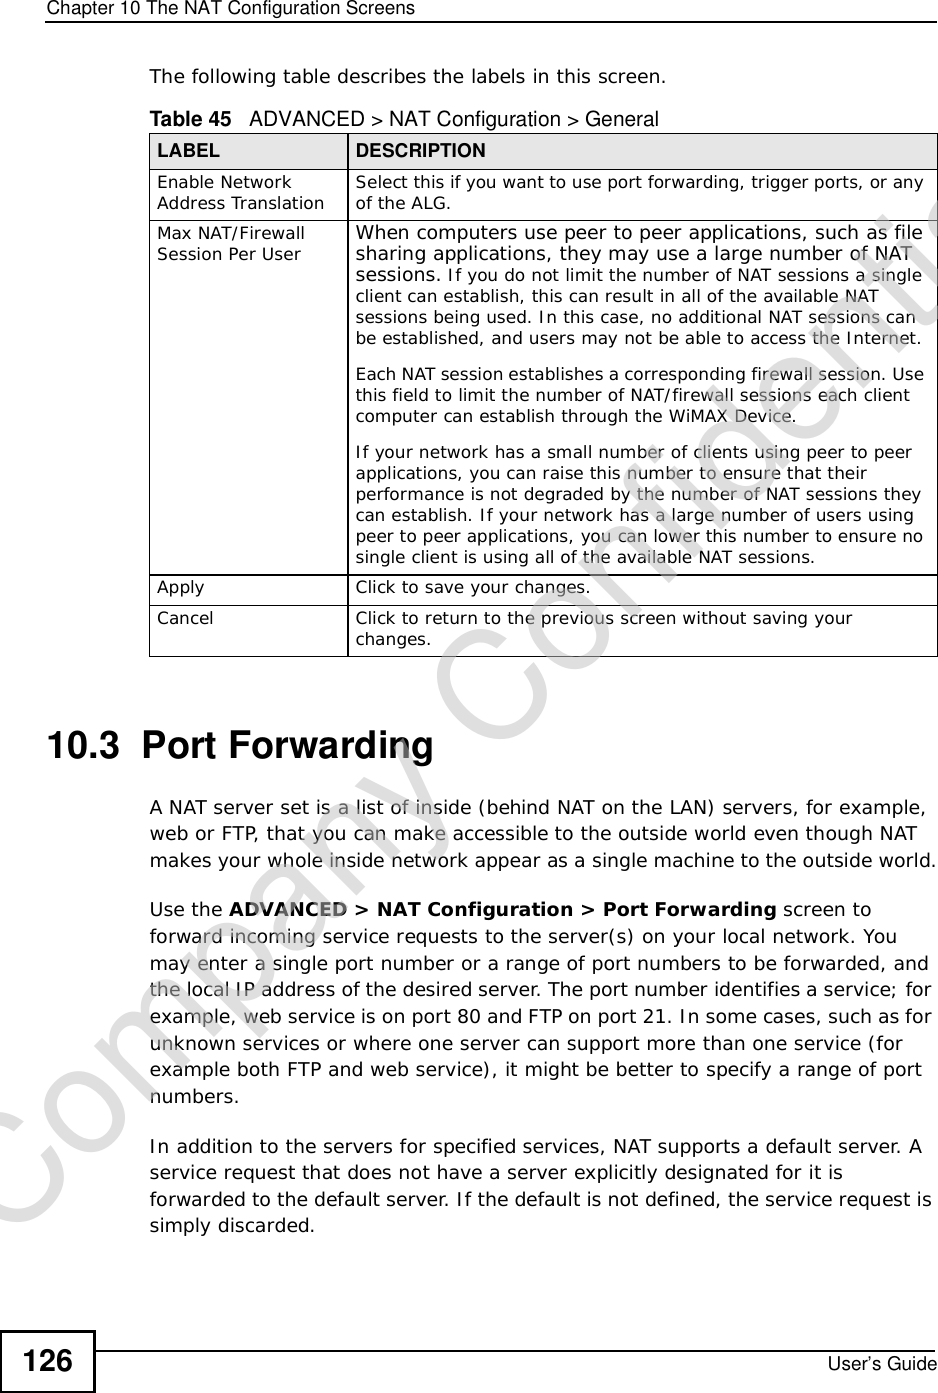 Chapter 10The NAT Configuration ScreensUser’s Guide126The following table describes the labels in this screen.10.3  Port Forwarding A NAT server set is a list of inside (behind NAT on the LAN) servers, for example, web or FTP, that you can make accessible to the outside world even though NAT makes your whole inside network appear as a single machine to the outside world.Use the ADVANCED &gt; NAT Configuration &gt; Port Forwarding screen to forward incoming service requests to the server(s) on your local network. You may enter a single port number or a range of port numbers to be forwarded, and the local IP address of the desired server. The port number identifies a service; for example, web service is on port 80 and FTP on port 21. In some cases, such as for unknown services or where one server can support more than one service (for example both FTP and web service), it might be better to specify a range of port numbers. In addition to the servers for specified services, NAT supports a default server. A service request that does not have a server explicitly designated for it is forwarded to the default server. If the default is not defined, the service request is simply discarded.Table 45   ADVANCED &gt; NAT Configuration &gt; GeneralLABEL DESCRIPTIONEnable Network Address Translation Select this if you want to use port forwarding, trigger ports, or any of the ALG.Max NAT/Firewall Session Per User When computers use peer to peer applications, such as file sharing applications, they may use a large number of NAT sessions. If you do not limit the number of NAT sessions a single client can establish, this can result in all of the available NAT sessions being used. In this case, no additional NAT sessions can be established, and users may not be able to access the Internet. Each NAT session establishes a corresponding firewall session. Use this field to limit the number of NAT/firewall sessions each client computer can establish through the WiMAX Device. If your network has a small number of clients using peer to peer applications, you can raise this number to ensure that their performance is not degraded by the number of NAT sessions they can establish. If your network has a large number of users using peer to peer applications, you can lower this number to ensure no single client is using all of the available NAT sessions. Apply Click to save your changes.CancelClick to return to the previous screen without saving your changes.Company Confidential